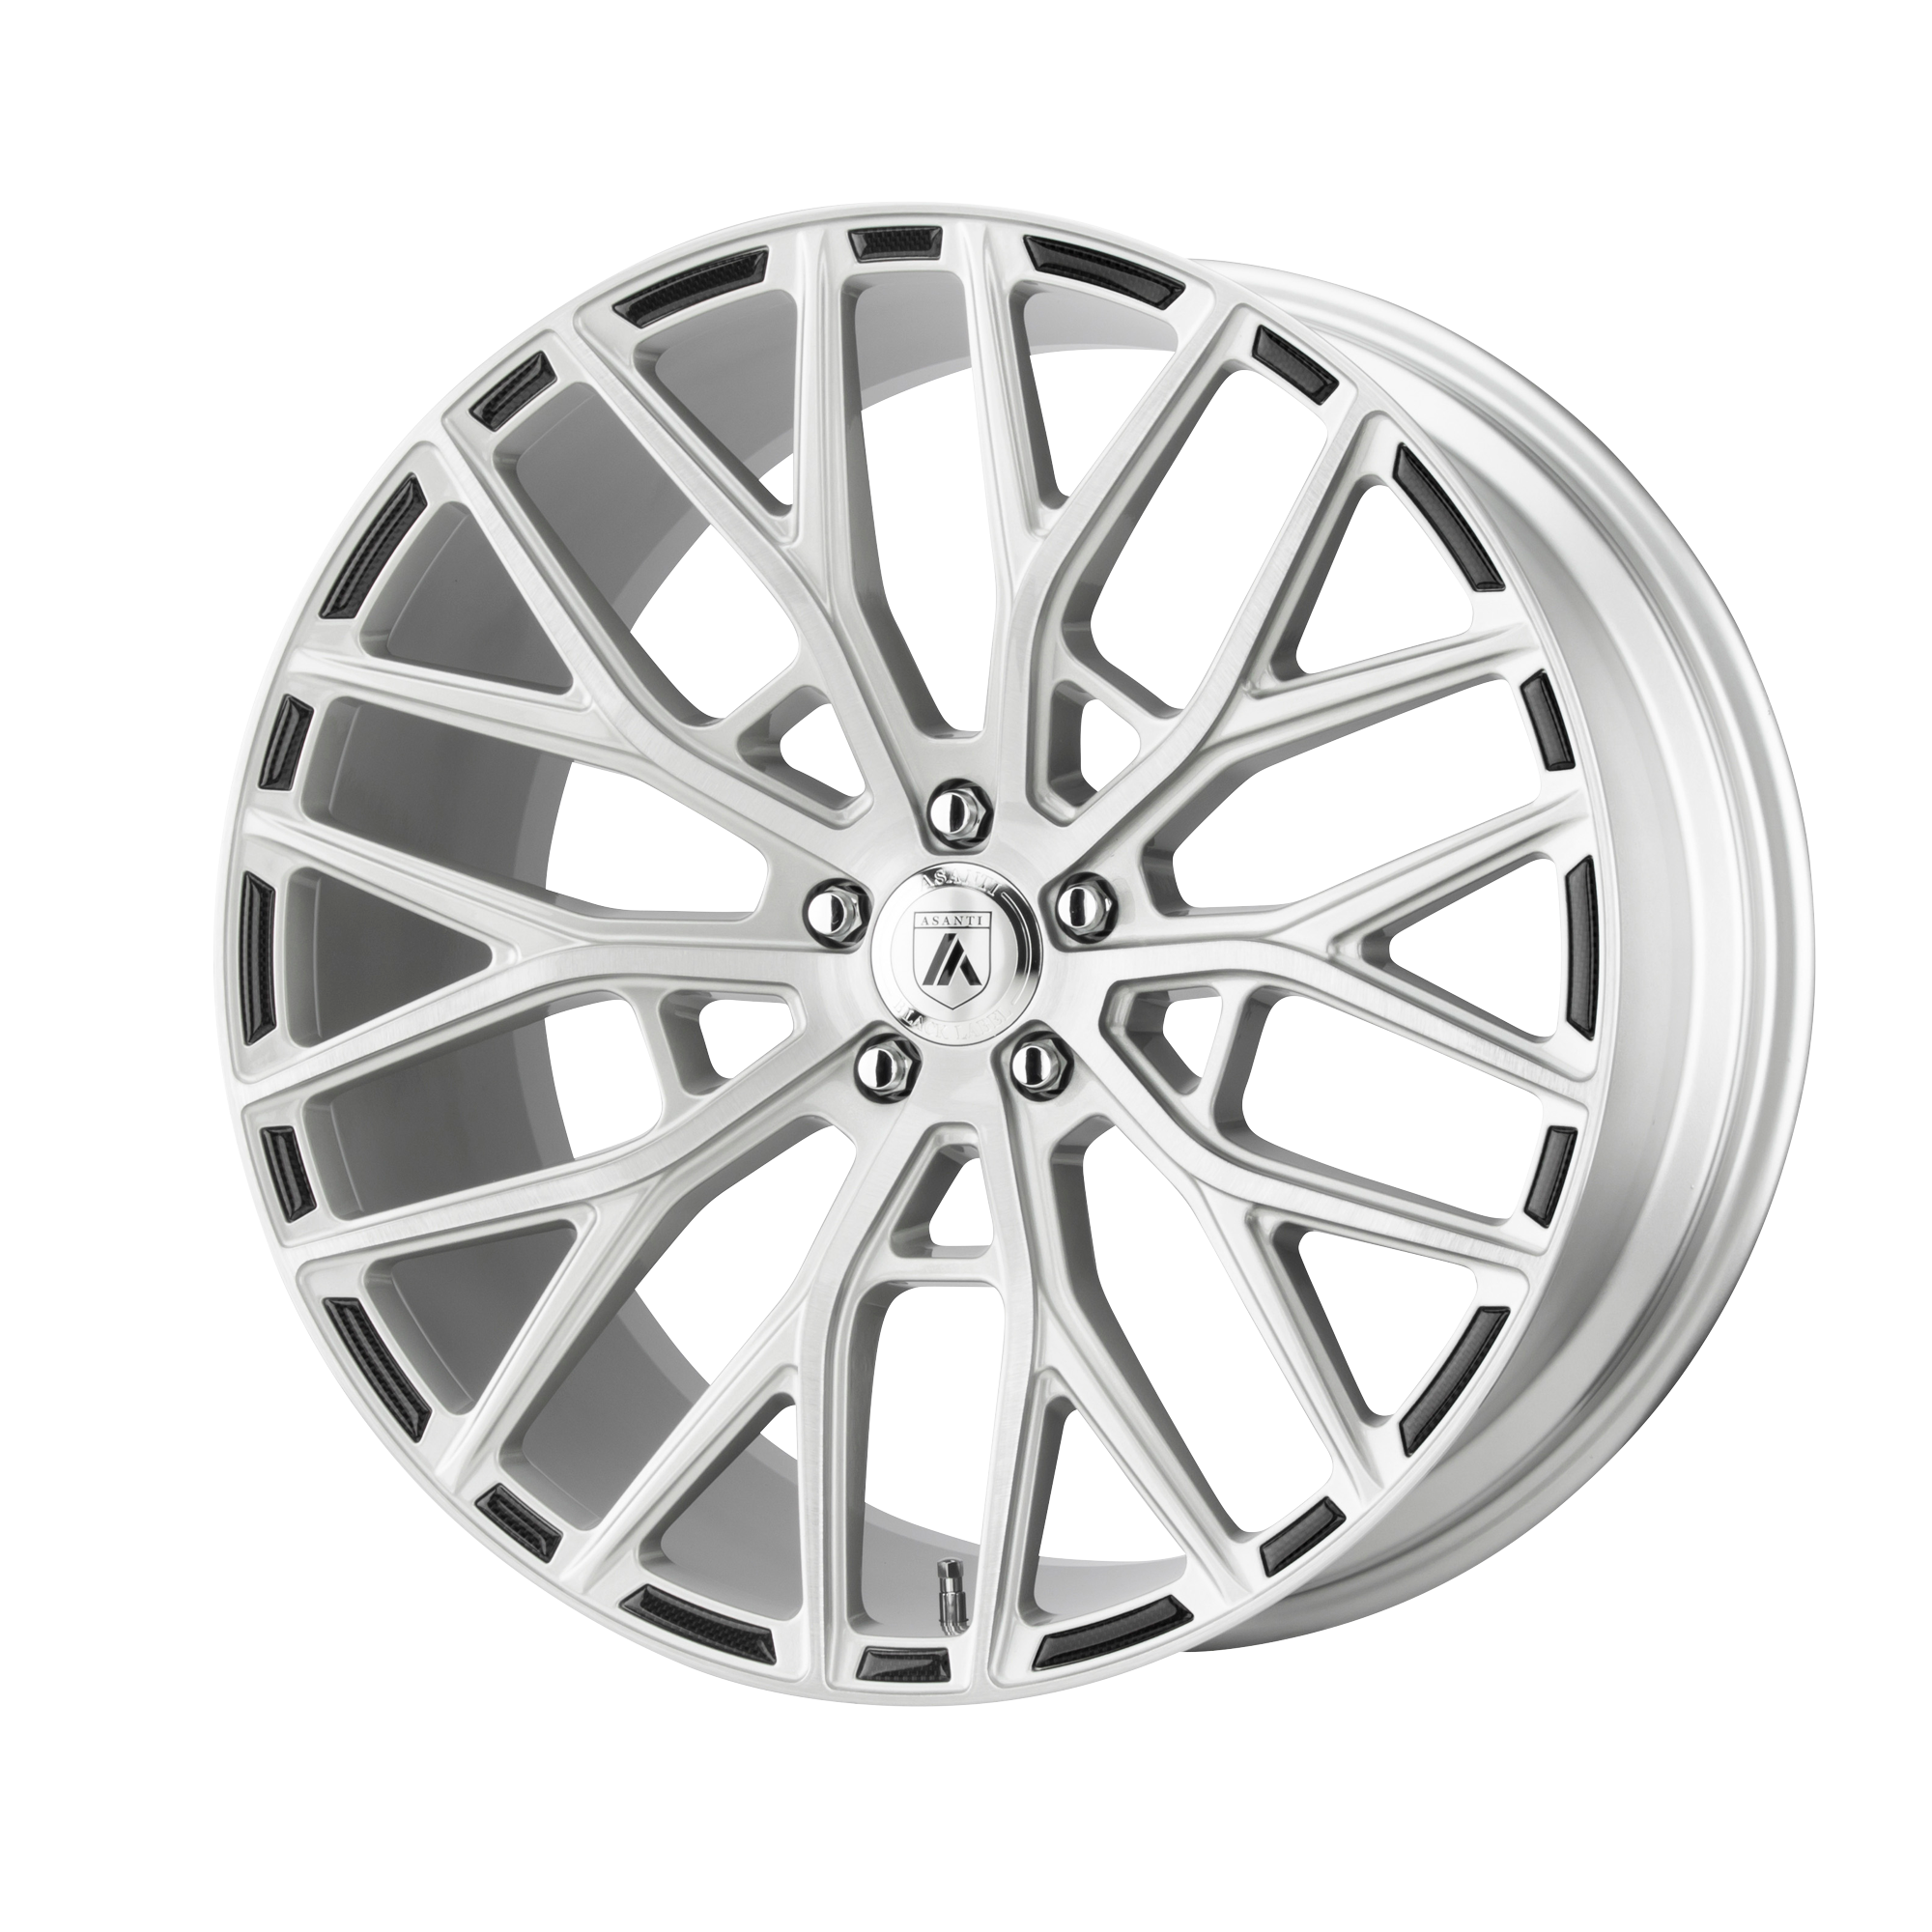 LEO 22x10.5 5x114.30 BRUSHED SILVER (35 mm) - Tires and Engine Performance